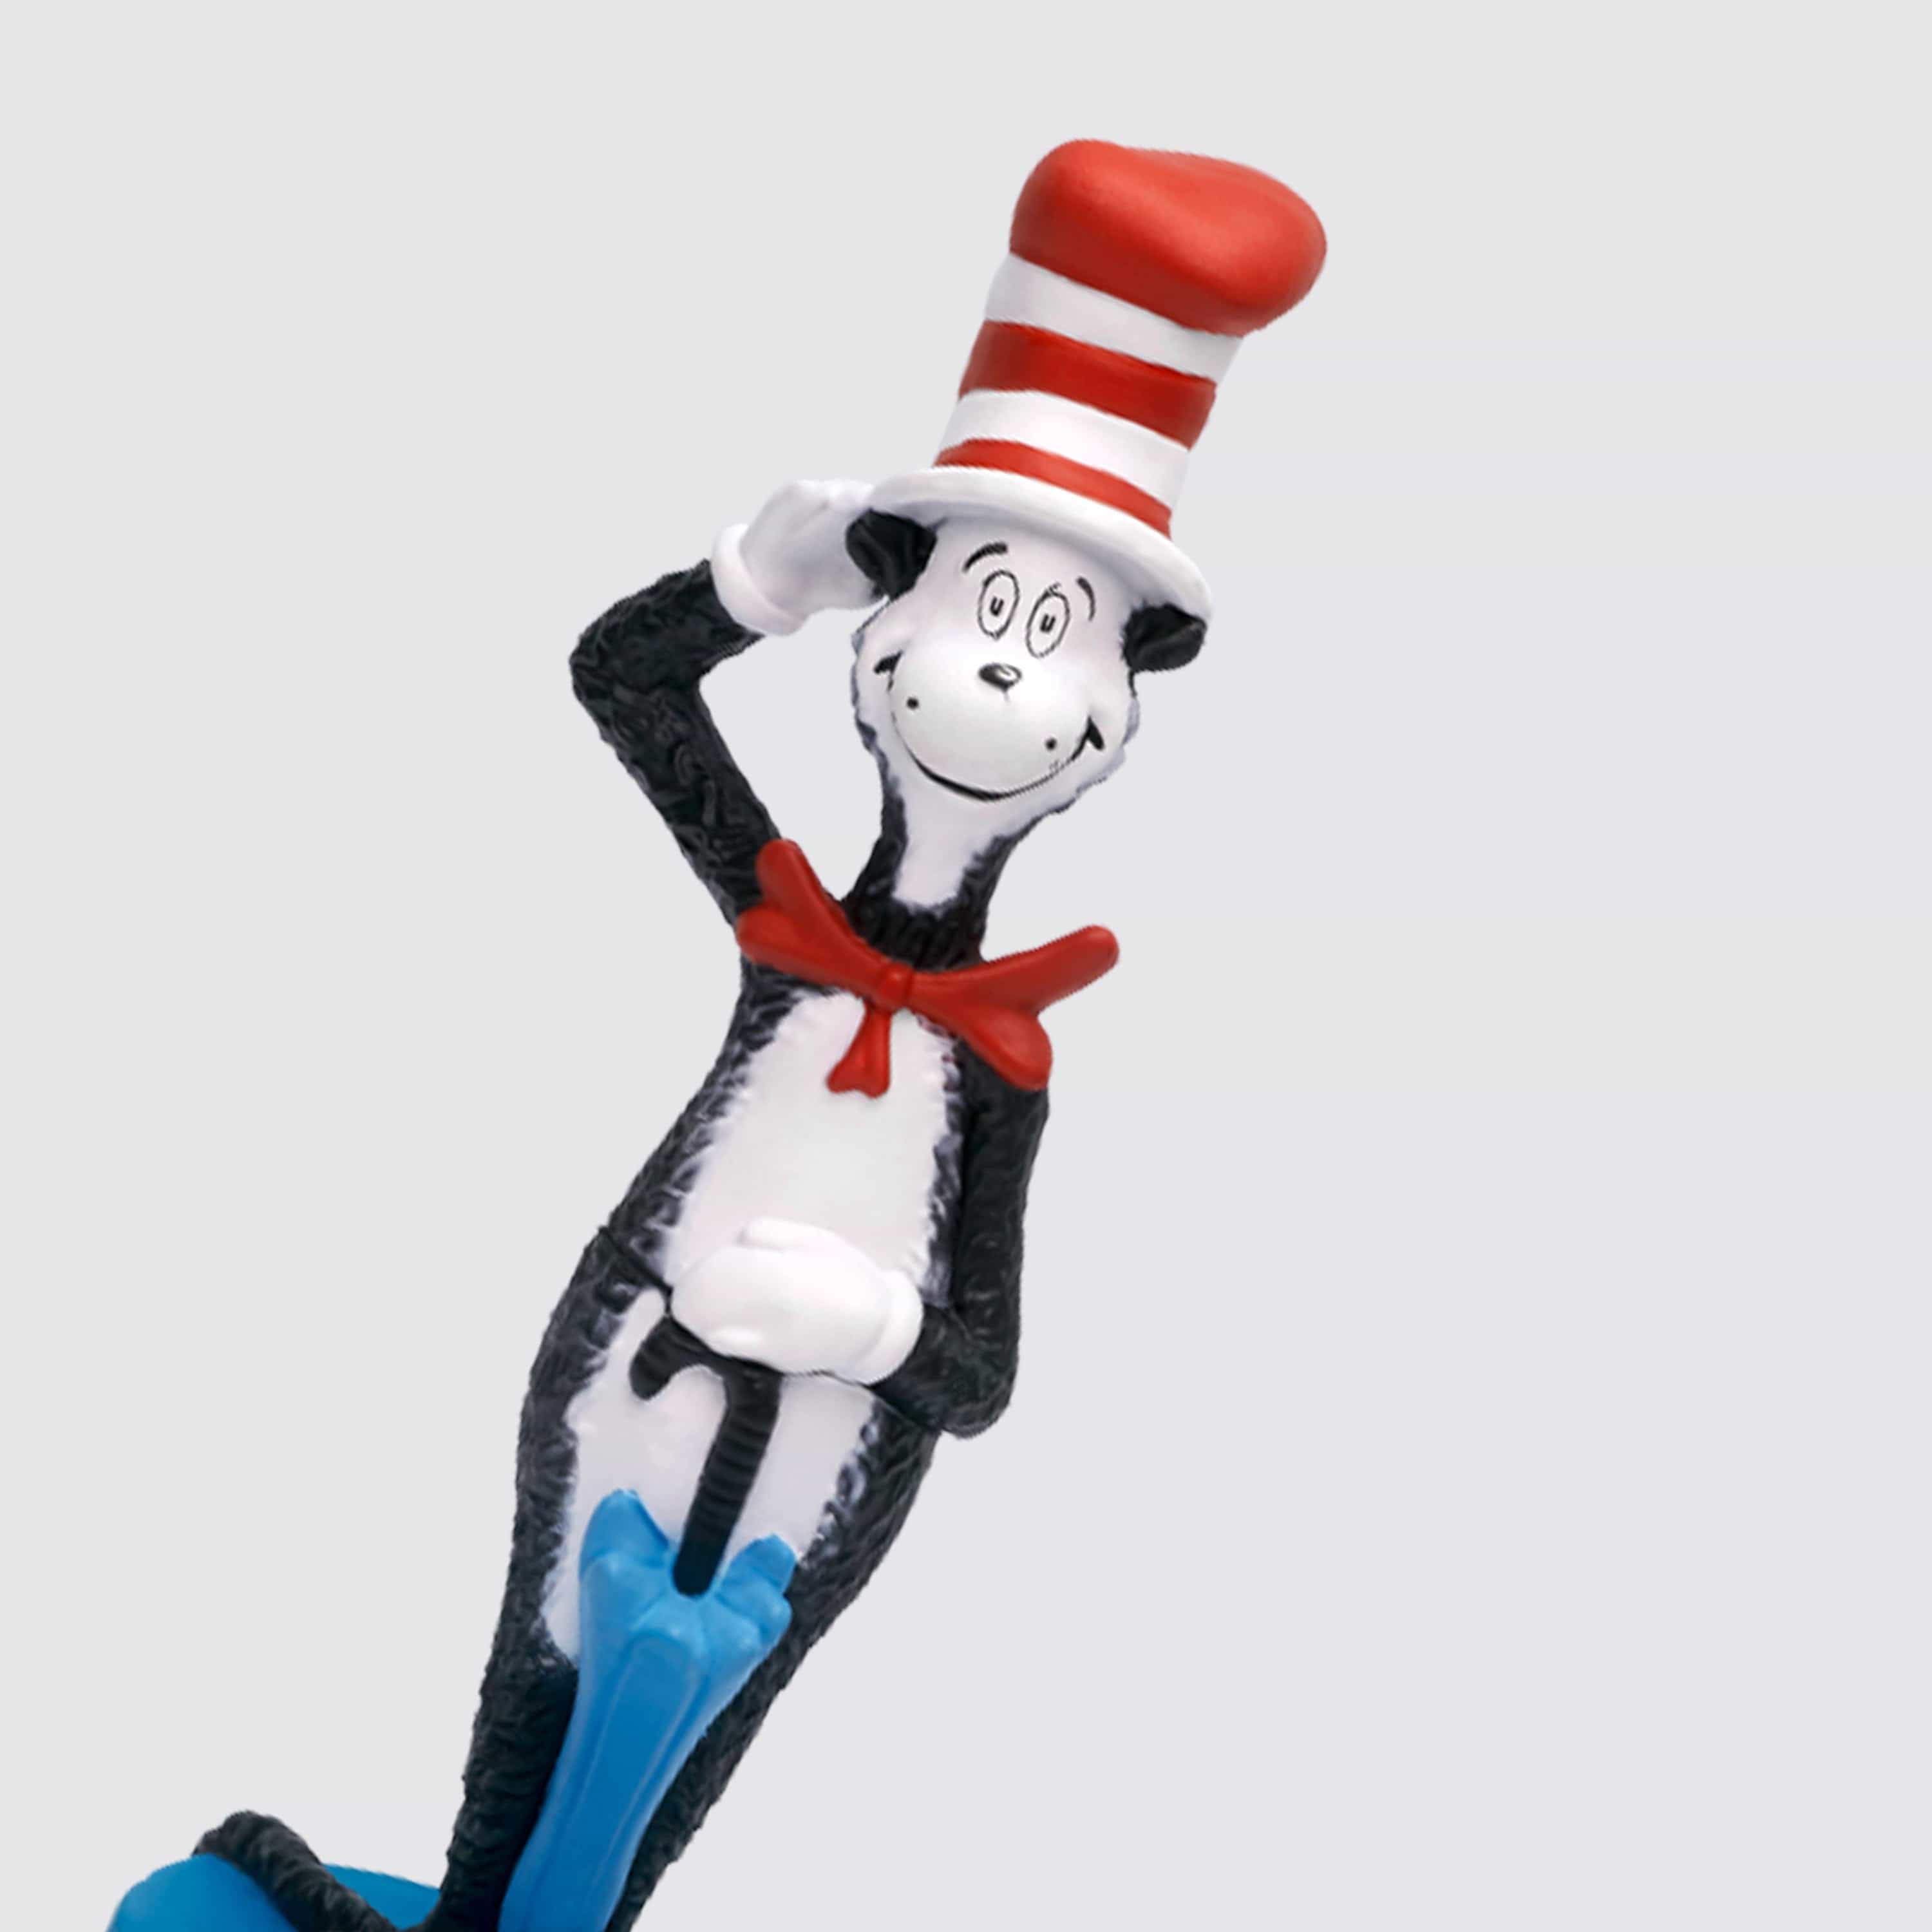 The Cat in the Hat by Dr. Seuss